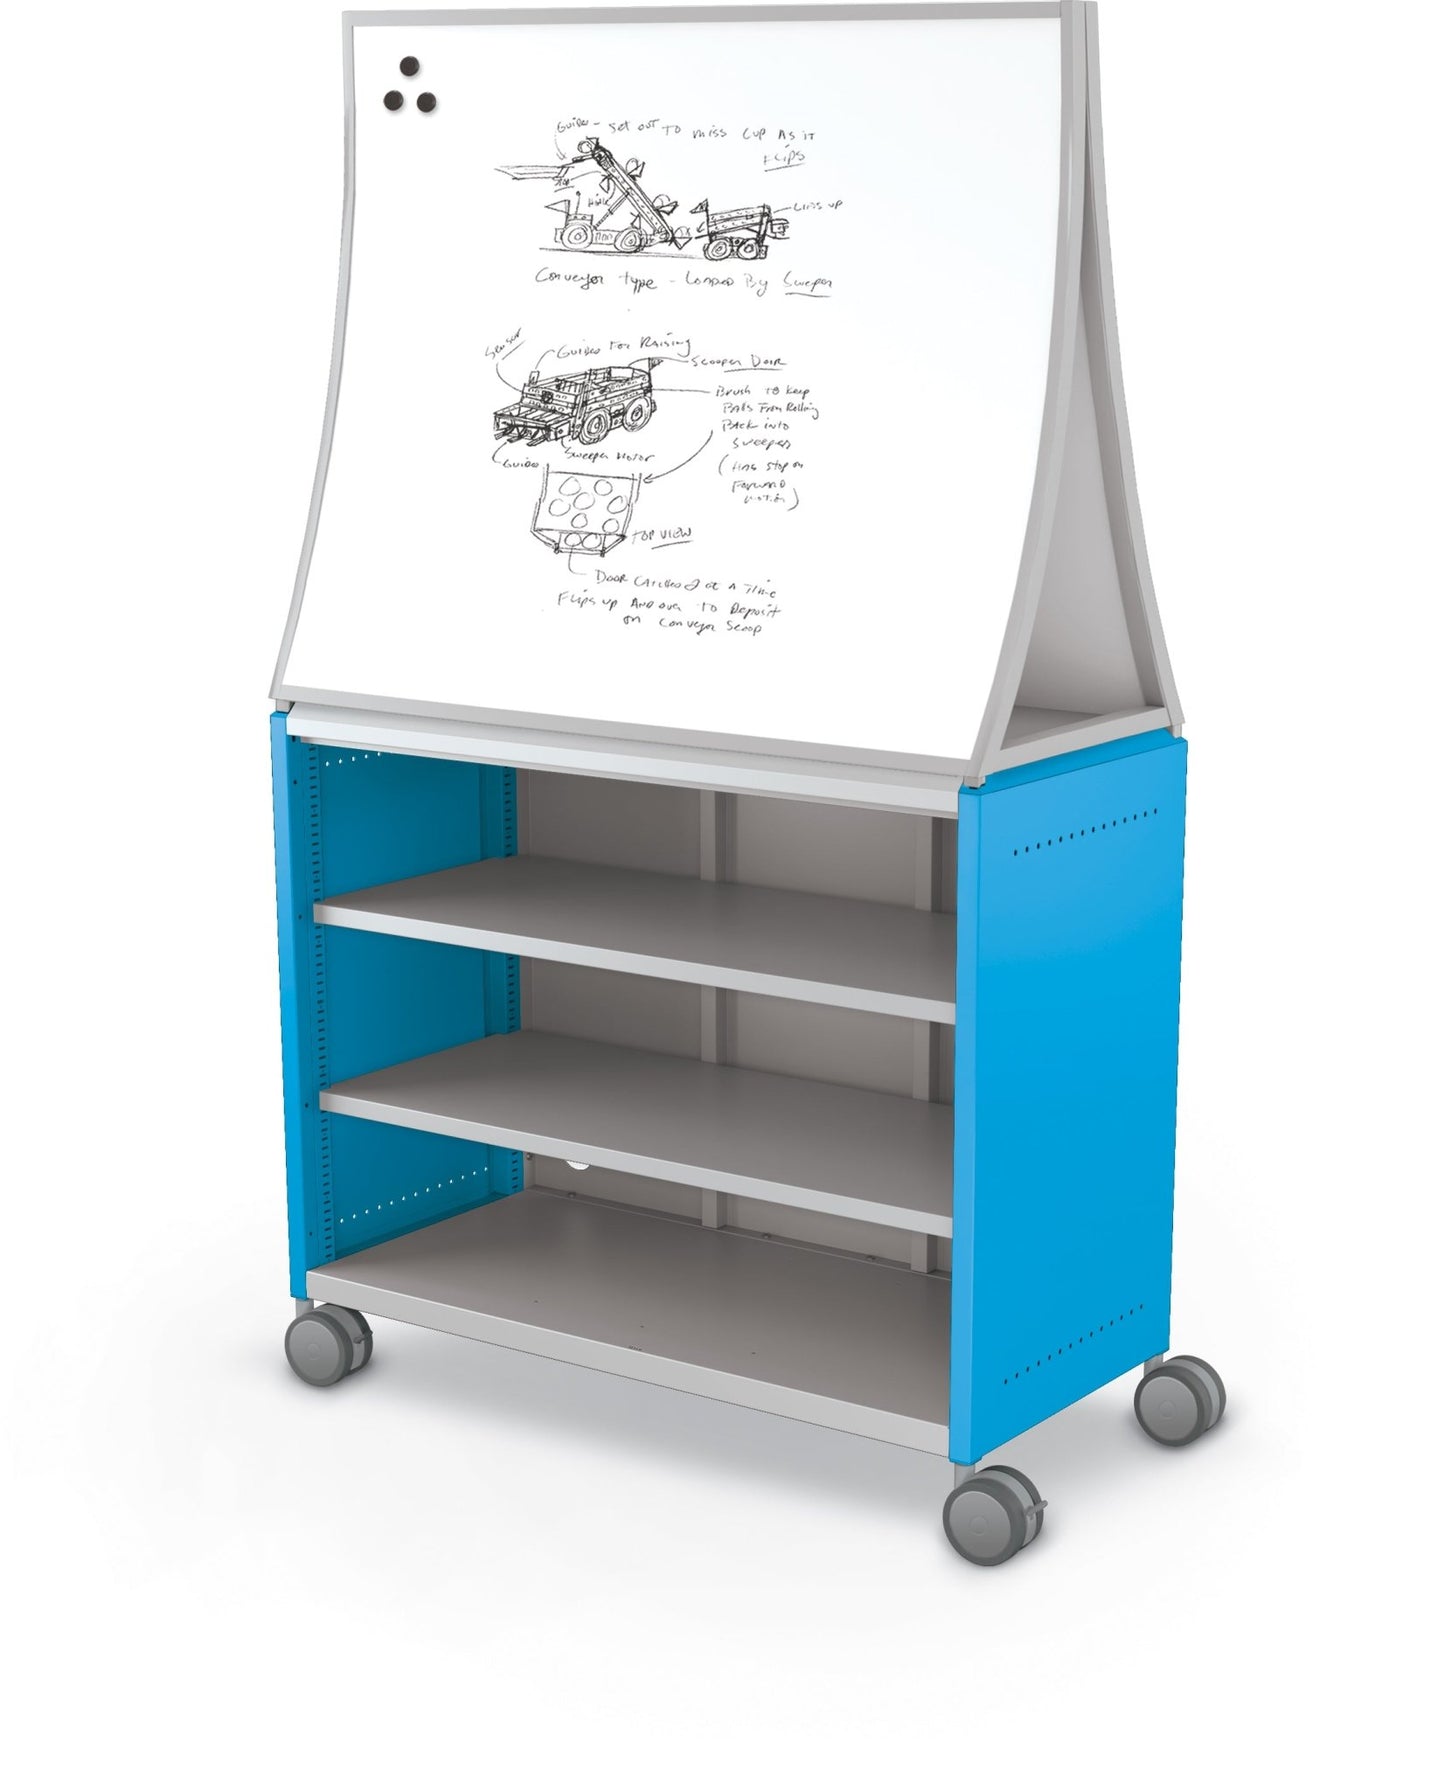 Mooreco Compass Cabinet Maxi H2 Standard Back and Side Panels, No Doors with Shelves, Casters and Ogee Board (MOR-B3A1X1D1B0) - SchoolOutlet